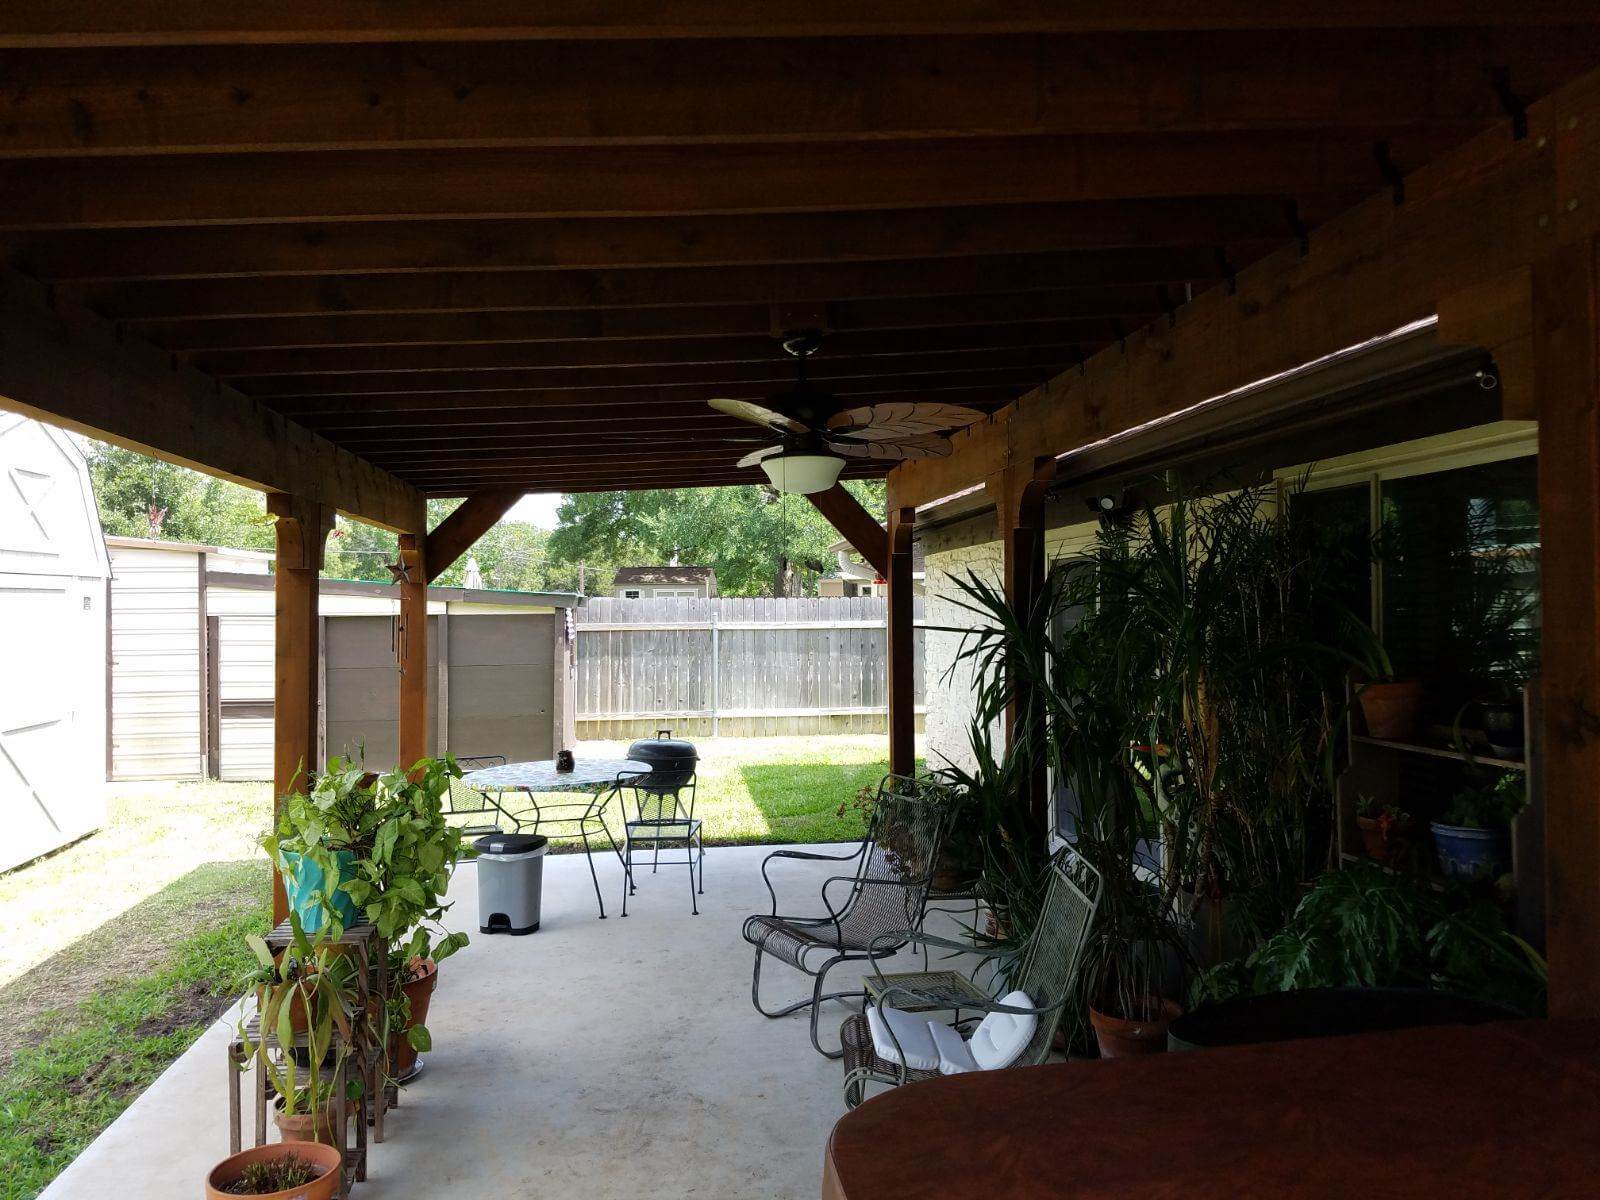 Pergola with ceiling fan over backyard patio